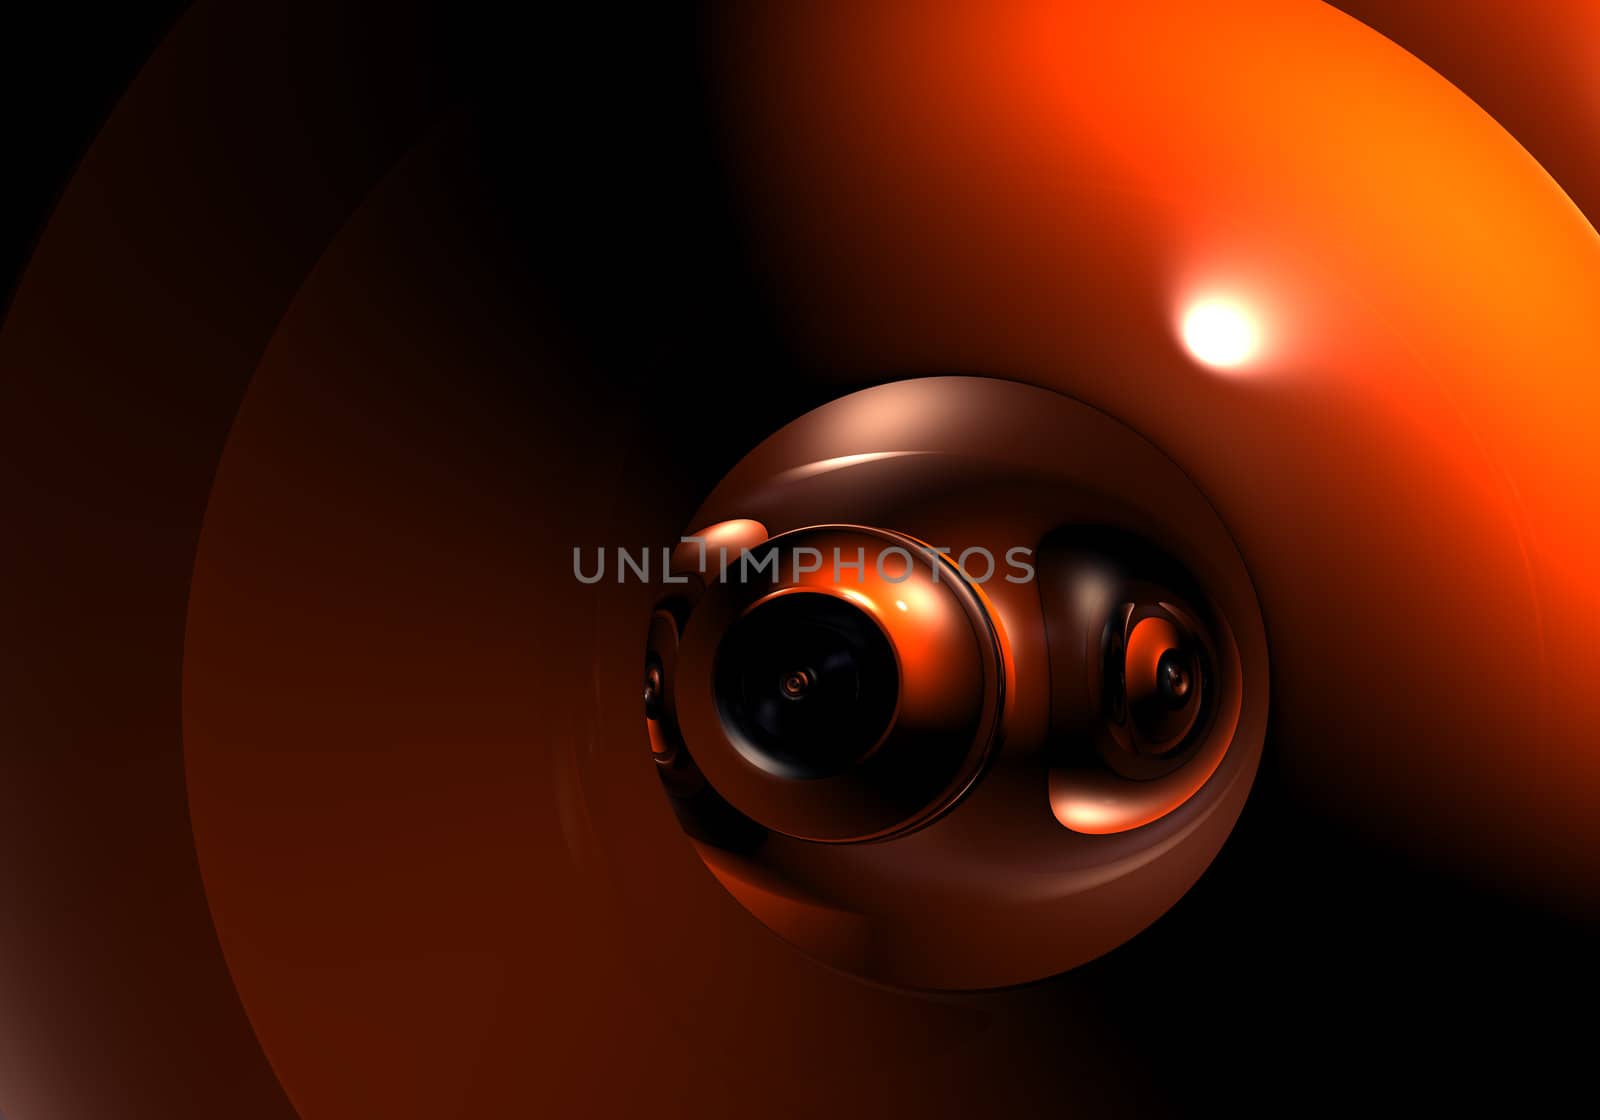 Abstract Background by Trusty